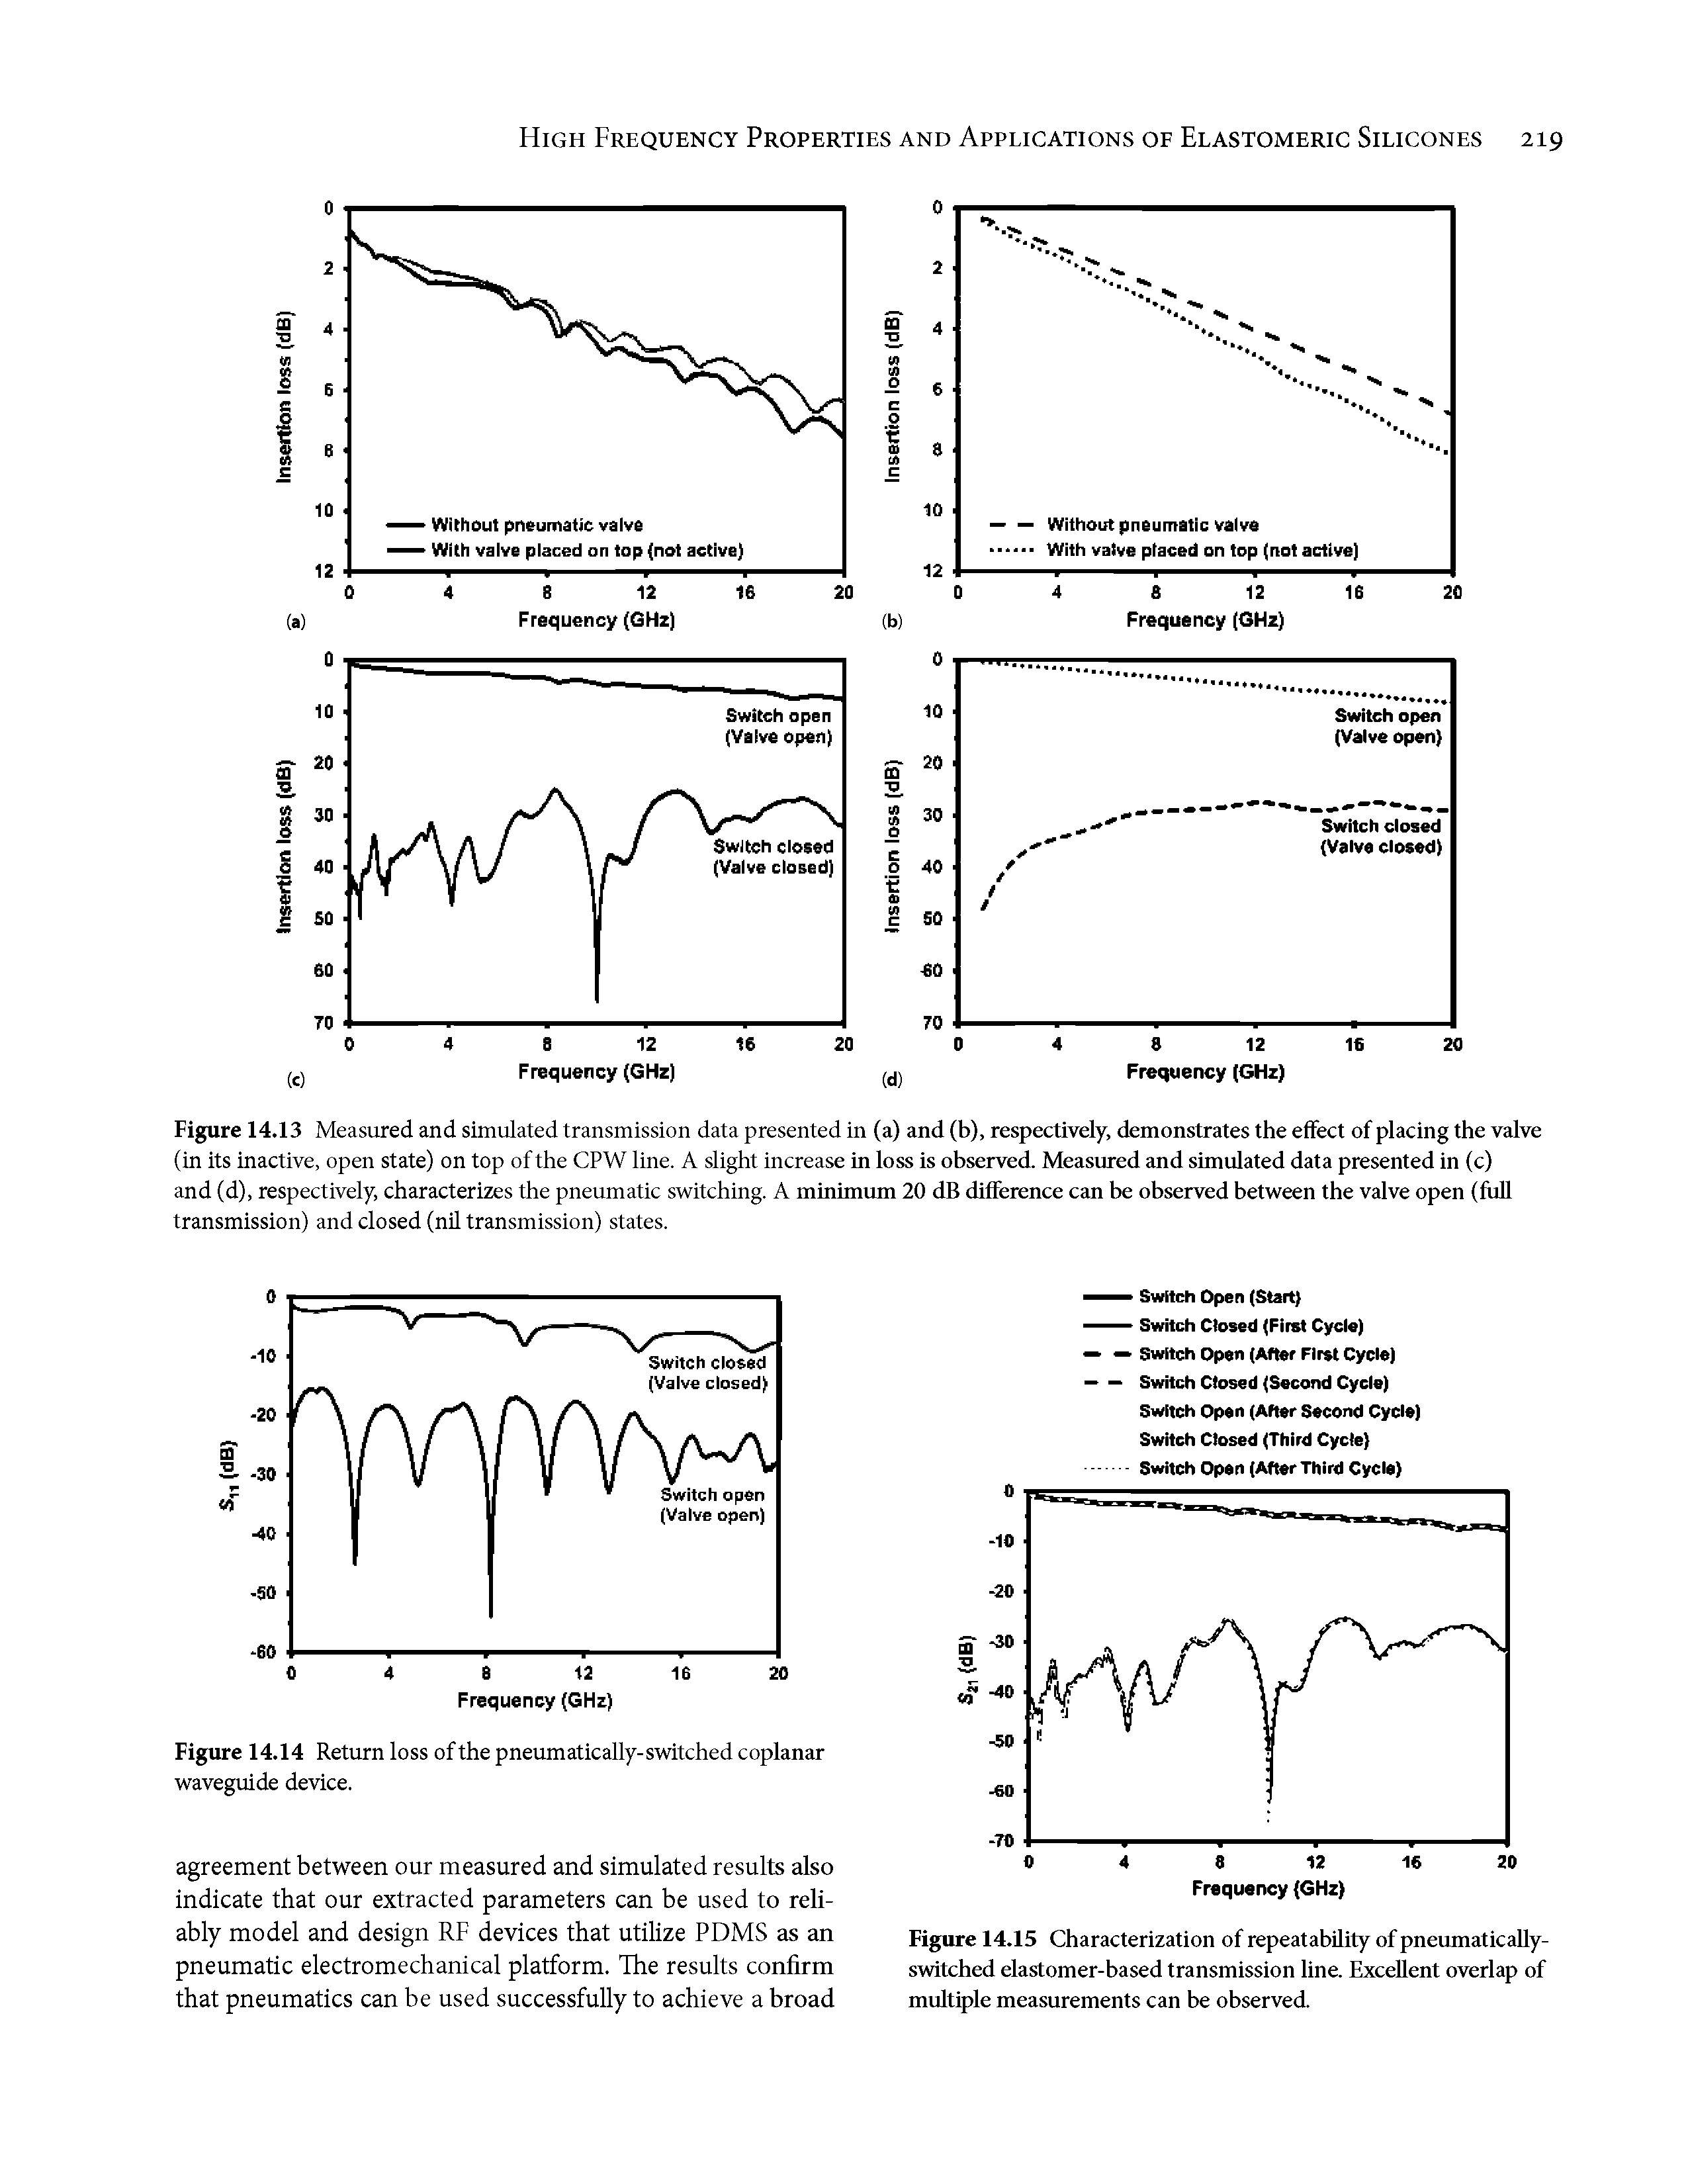 Figure 14.13 Measured and simulated transmission data presented in (a) and (b), respectively, demonstrates the effect of placing the valve (in its inactive, open state) on top of the CPW line. A slight increase in loss is observed. Measured and simulated data presented in (c) and (d), respectively, characterizes the pneumatic switching. A minimum 20 dB difference can be observed between the valve open (full transmission) and closed (nil transmission) states.